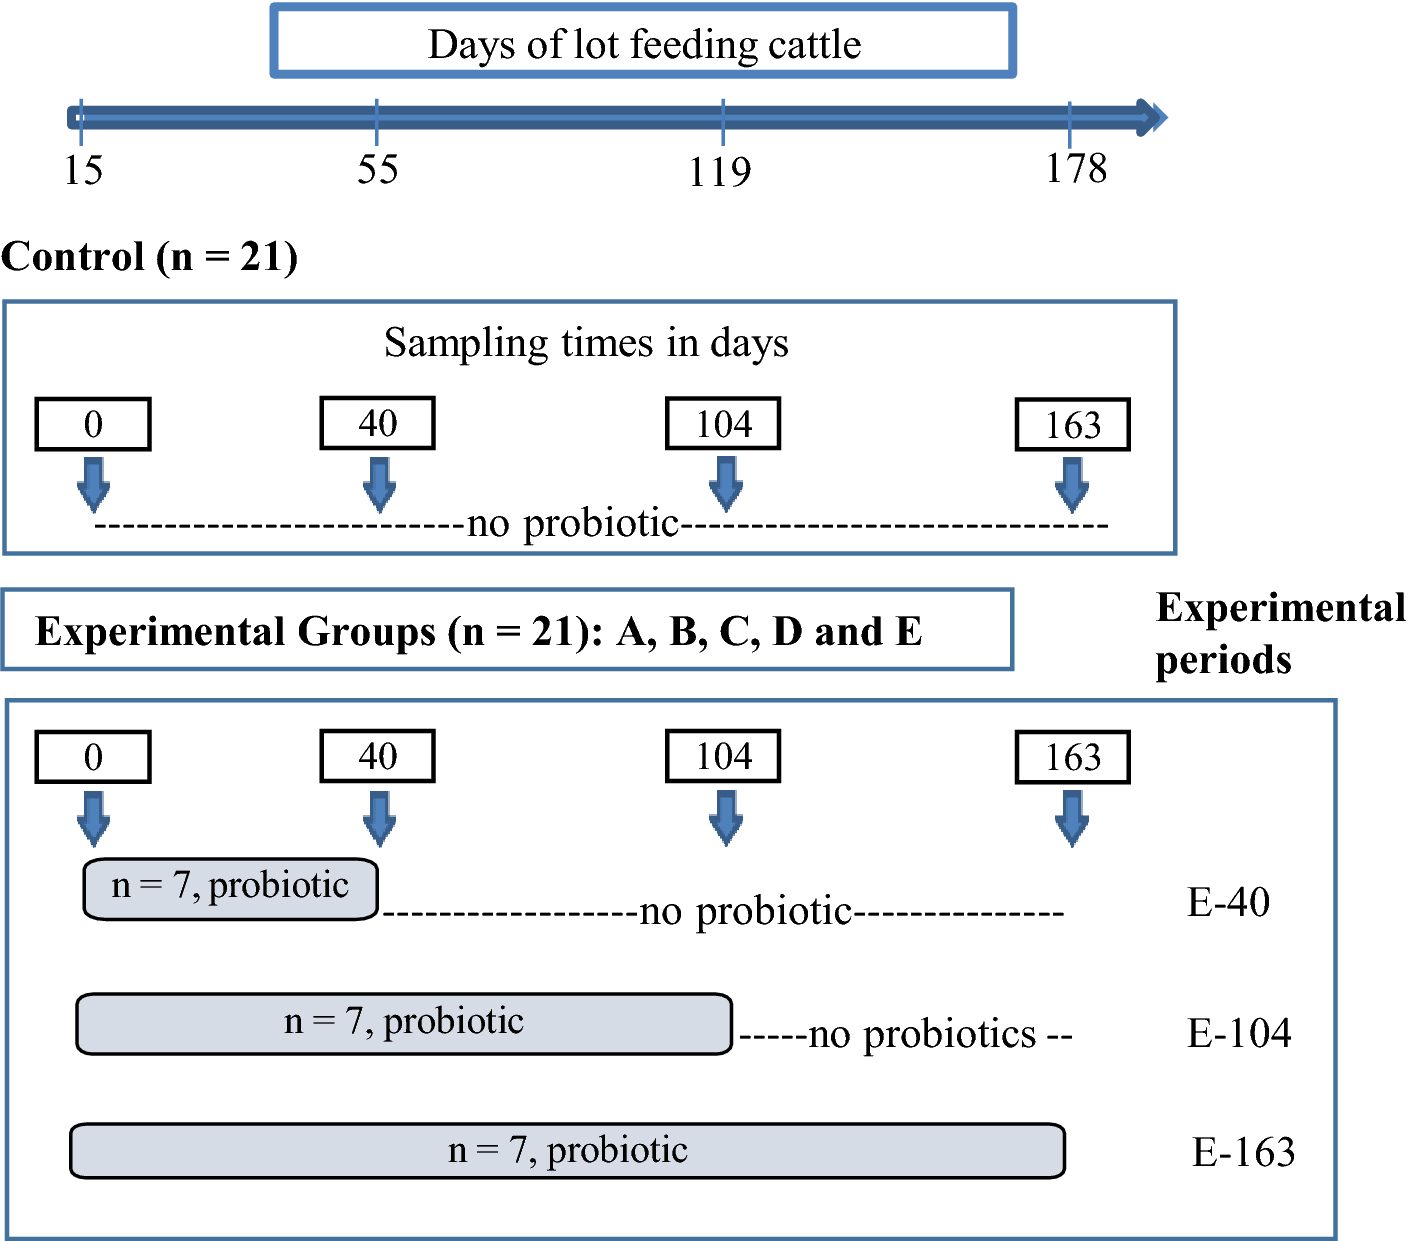 Administration of probiotic lactic acid bacteria to modulate fecal  microbiome in feedlot cattle | Scientific Reports